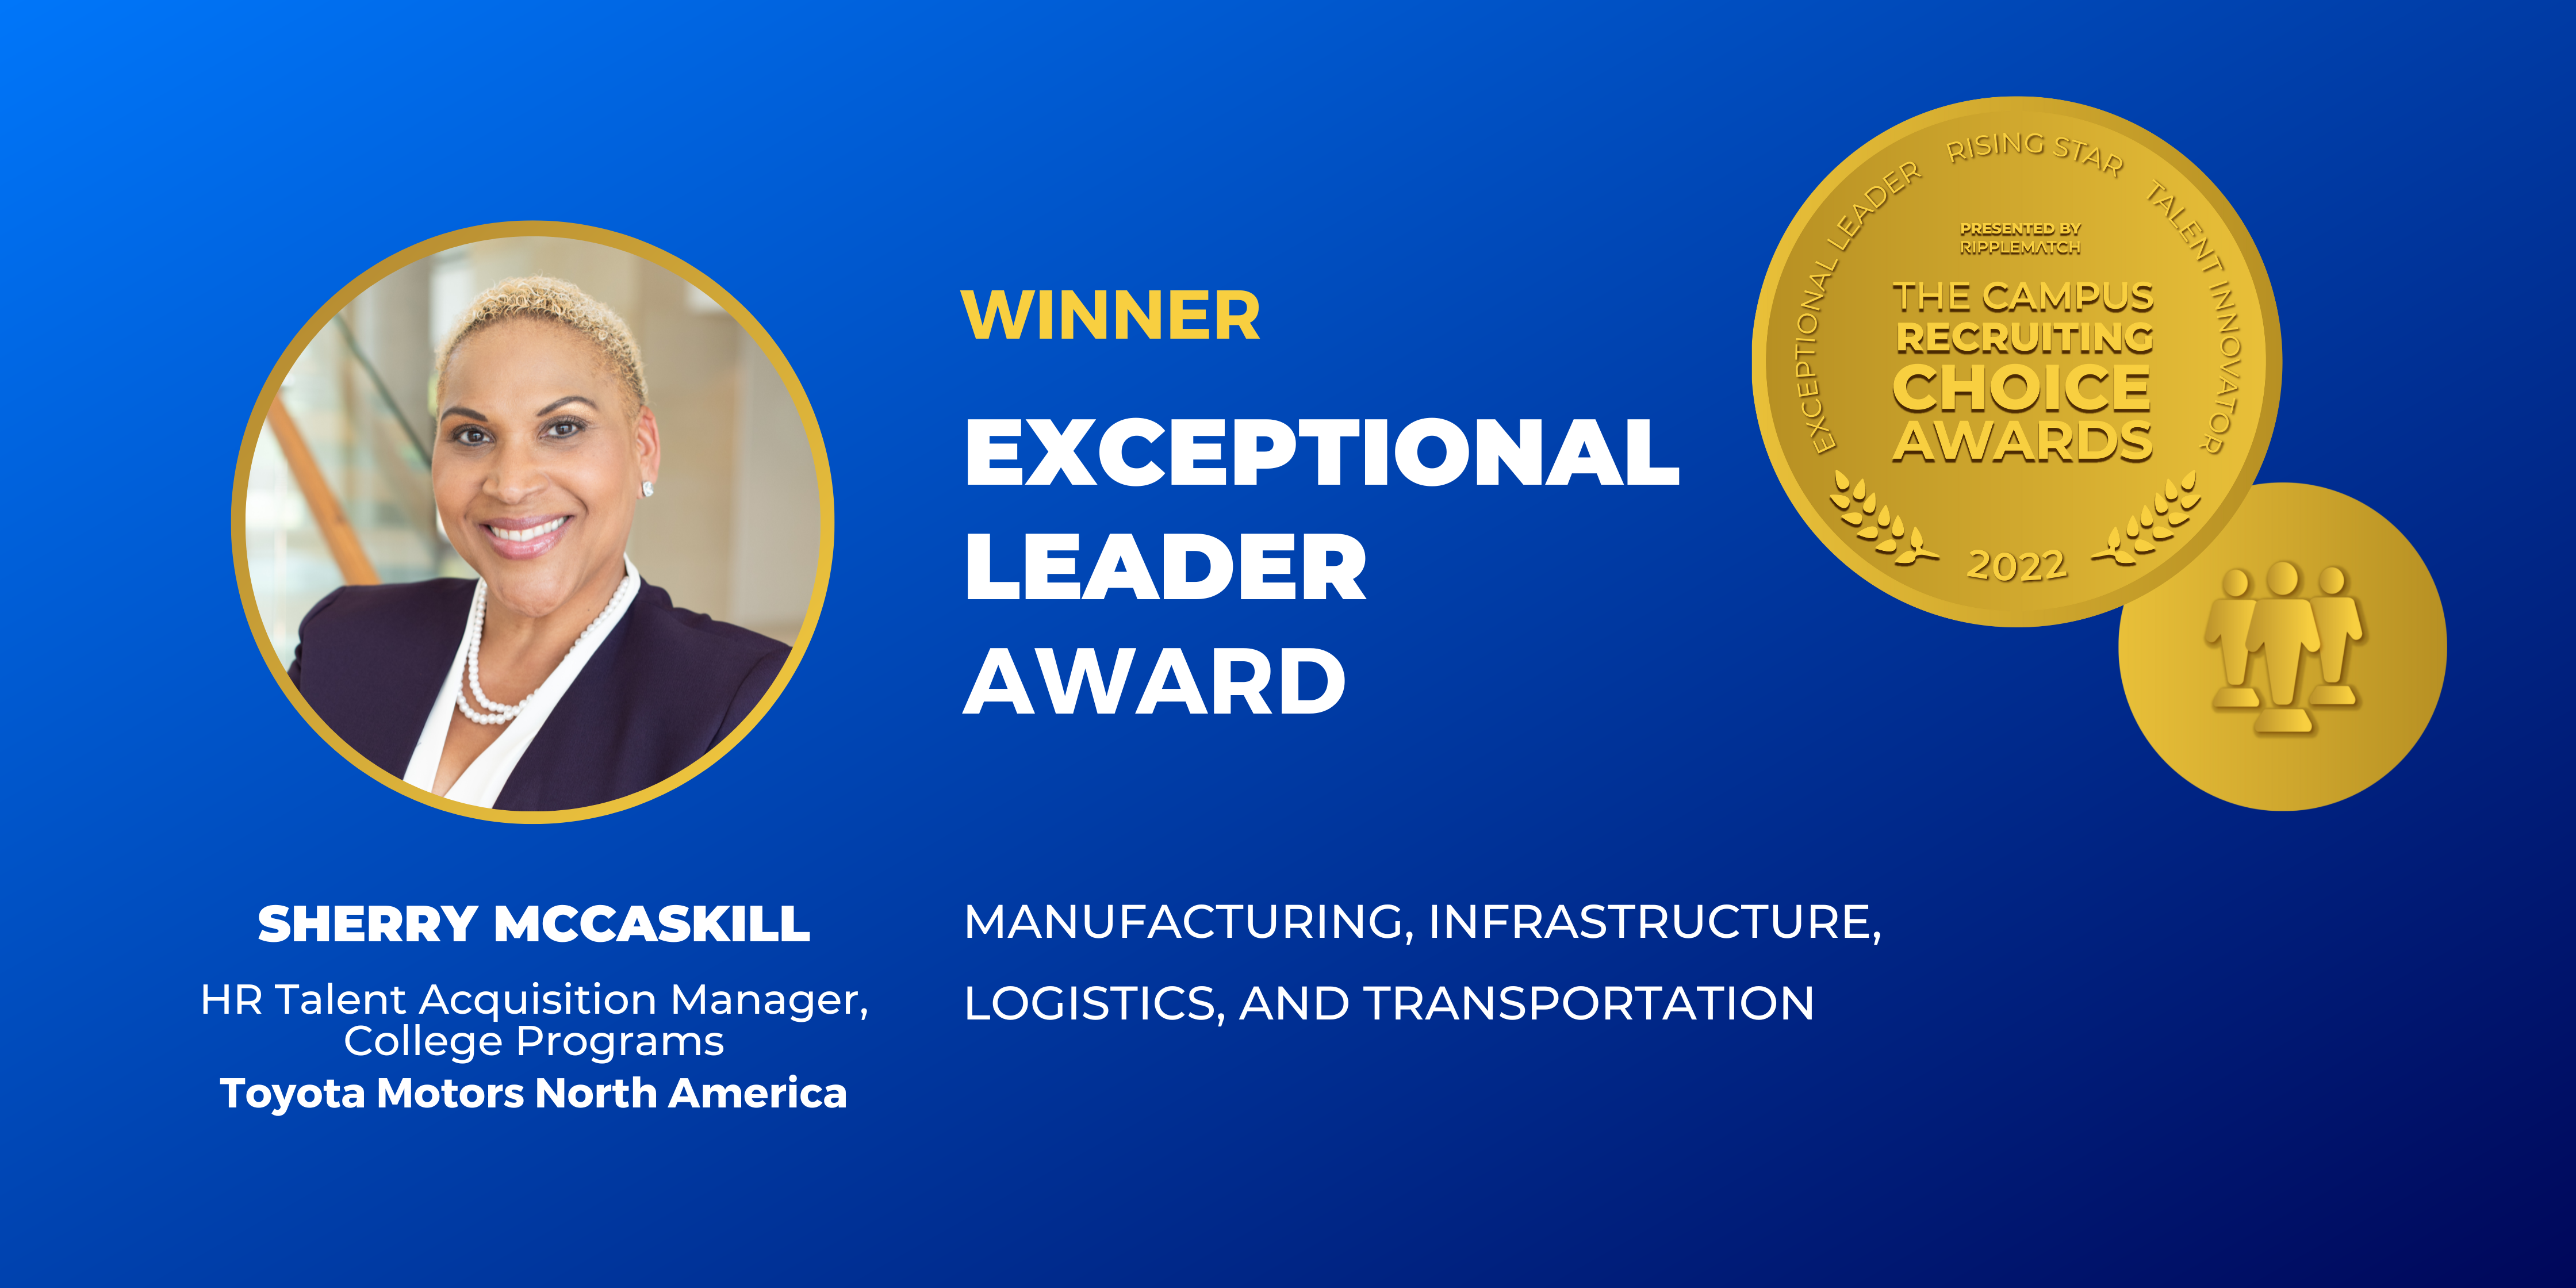 EXCEPTIONAL LEADER - Winner - Manufacturing, Infrastructure, Logistics, and Transportation - Sherry McCaskill